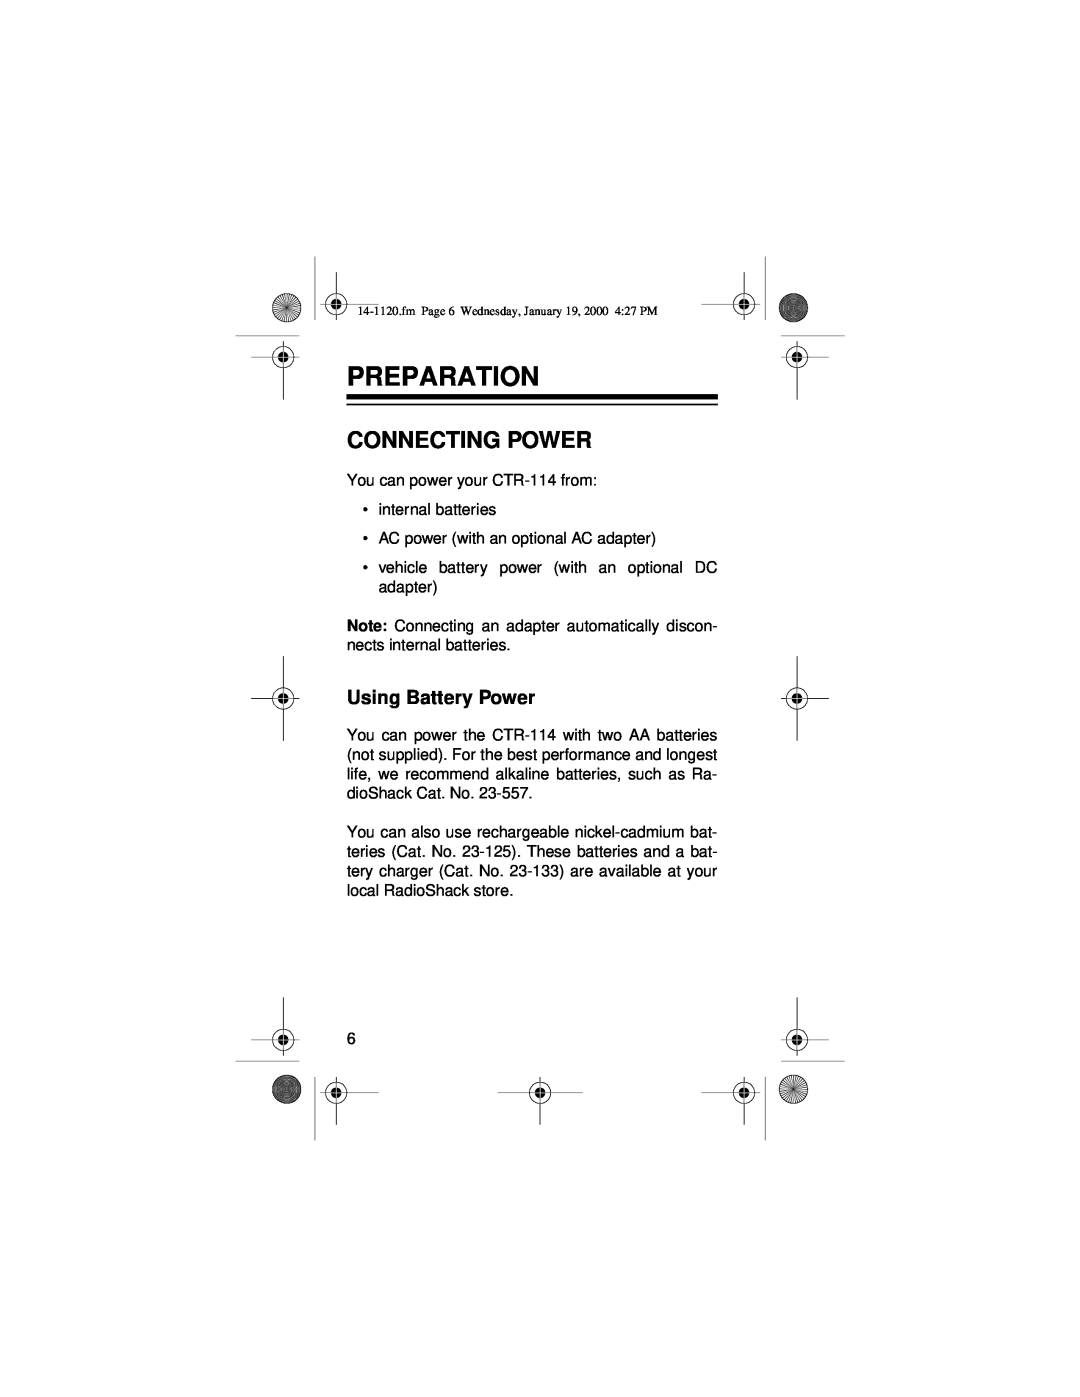 Panasonic CTR-114 owner manual Preparation, Connecting Power, Using Battery Power 